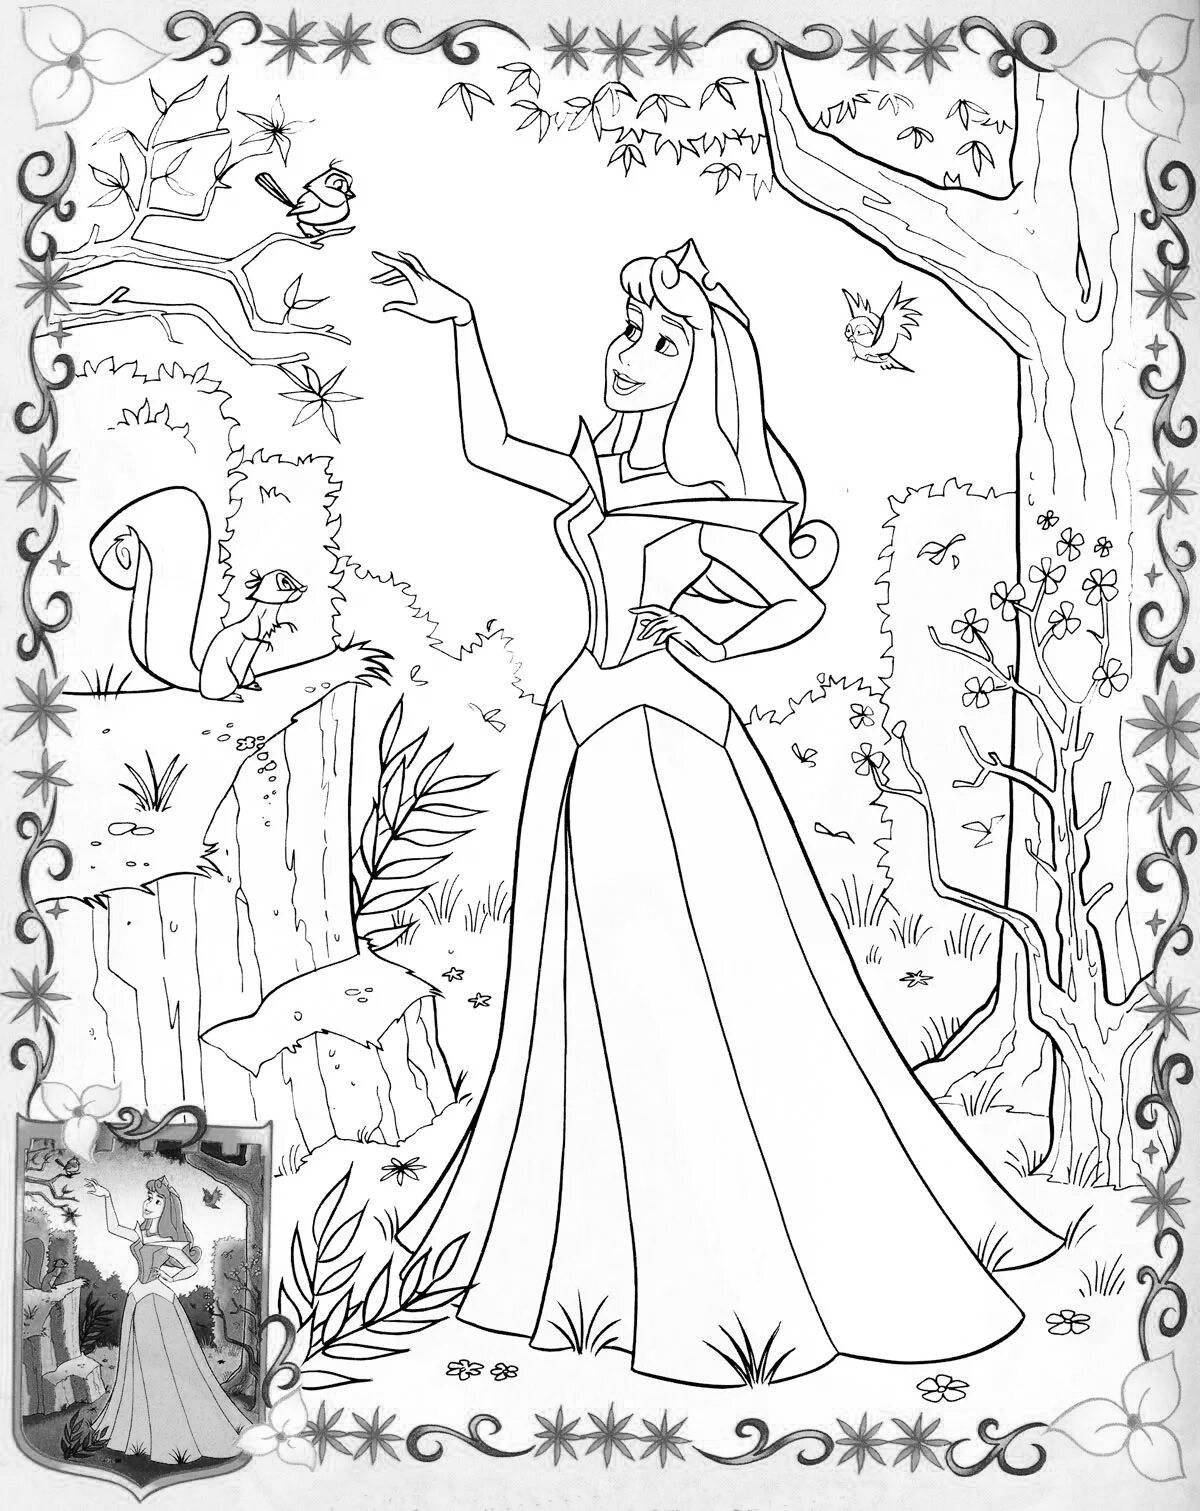 Fancy aurora coloring book for kids